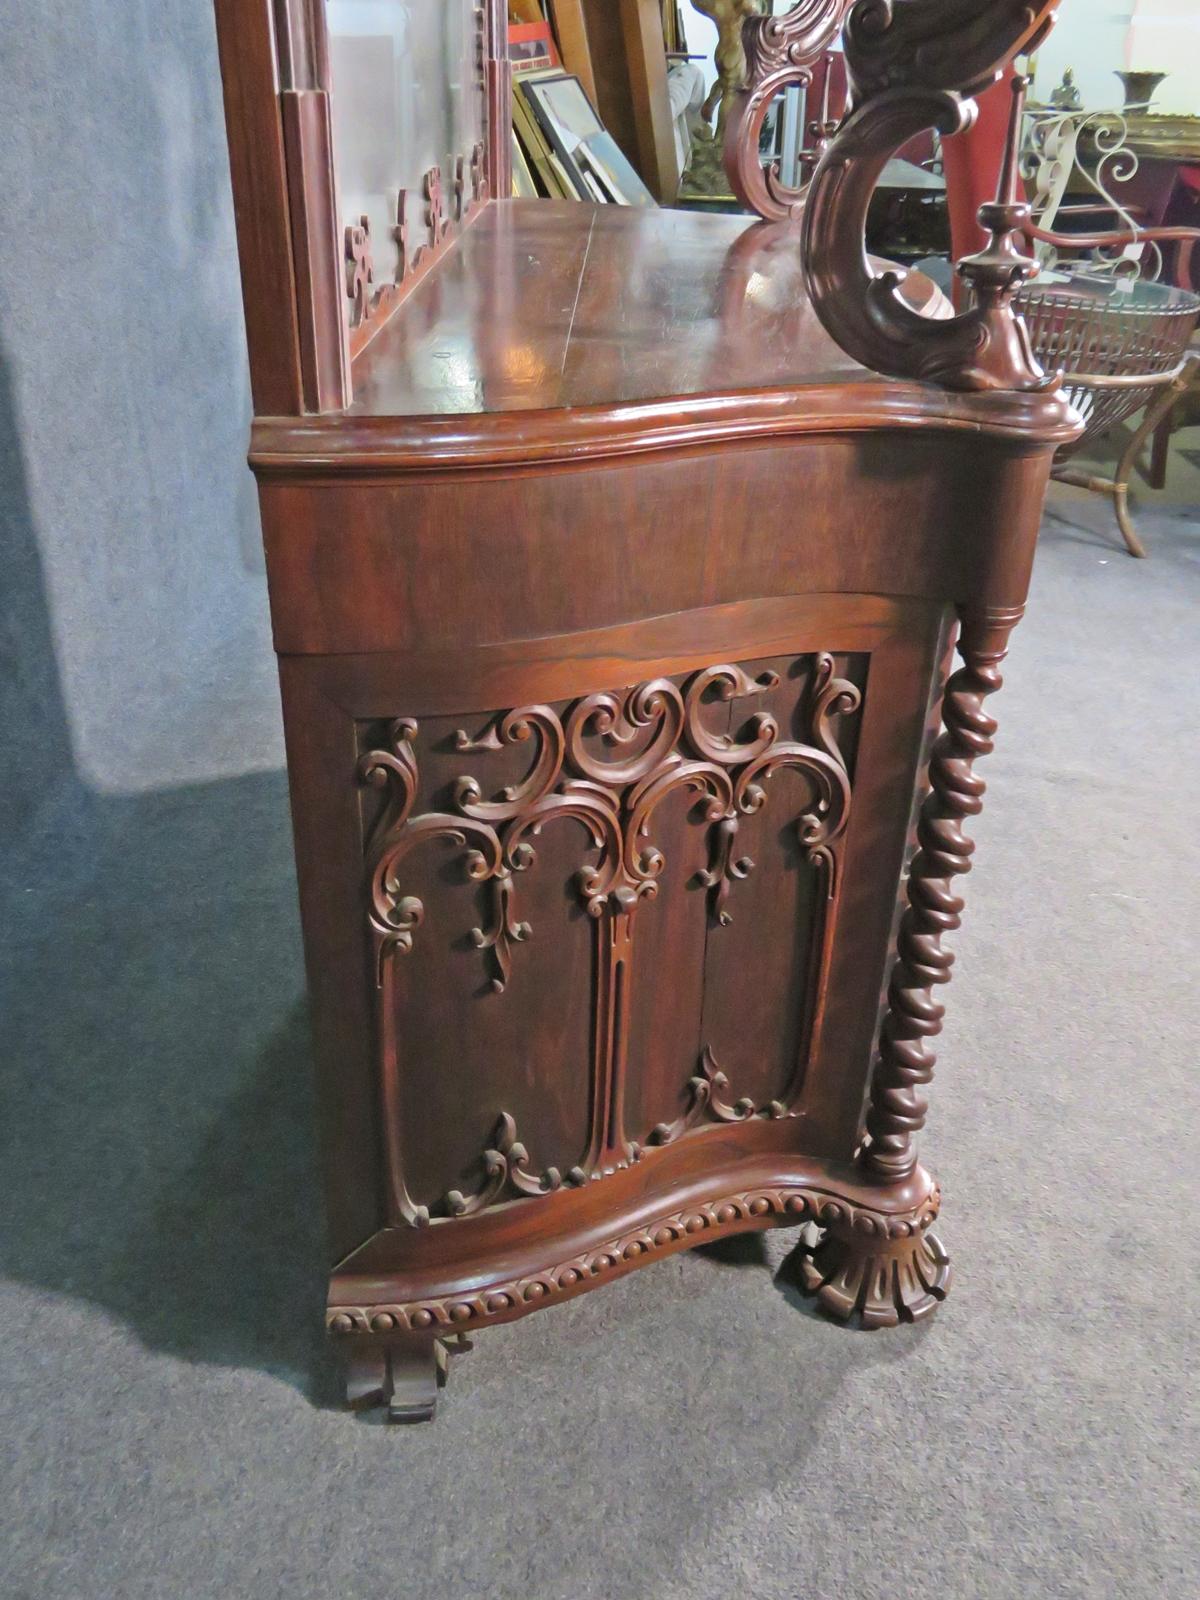 Rare Rosewood American Victorian Etagere Attributed to Alexander Roux C1860s In Good Condition For Sale In Swedesboro, NJ